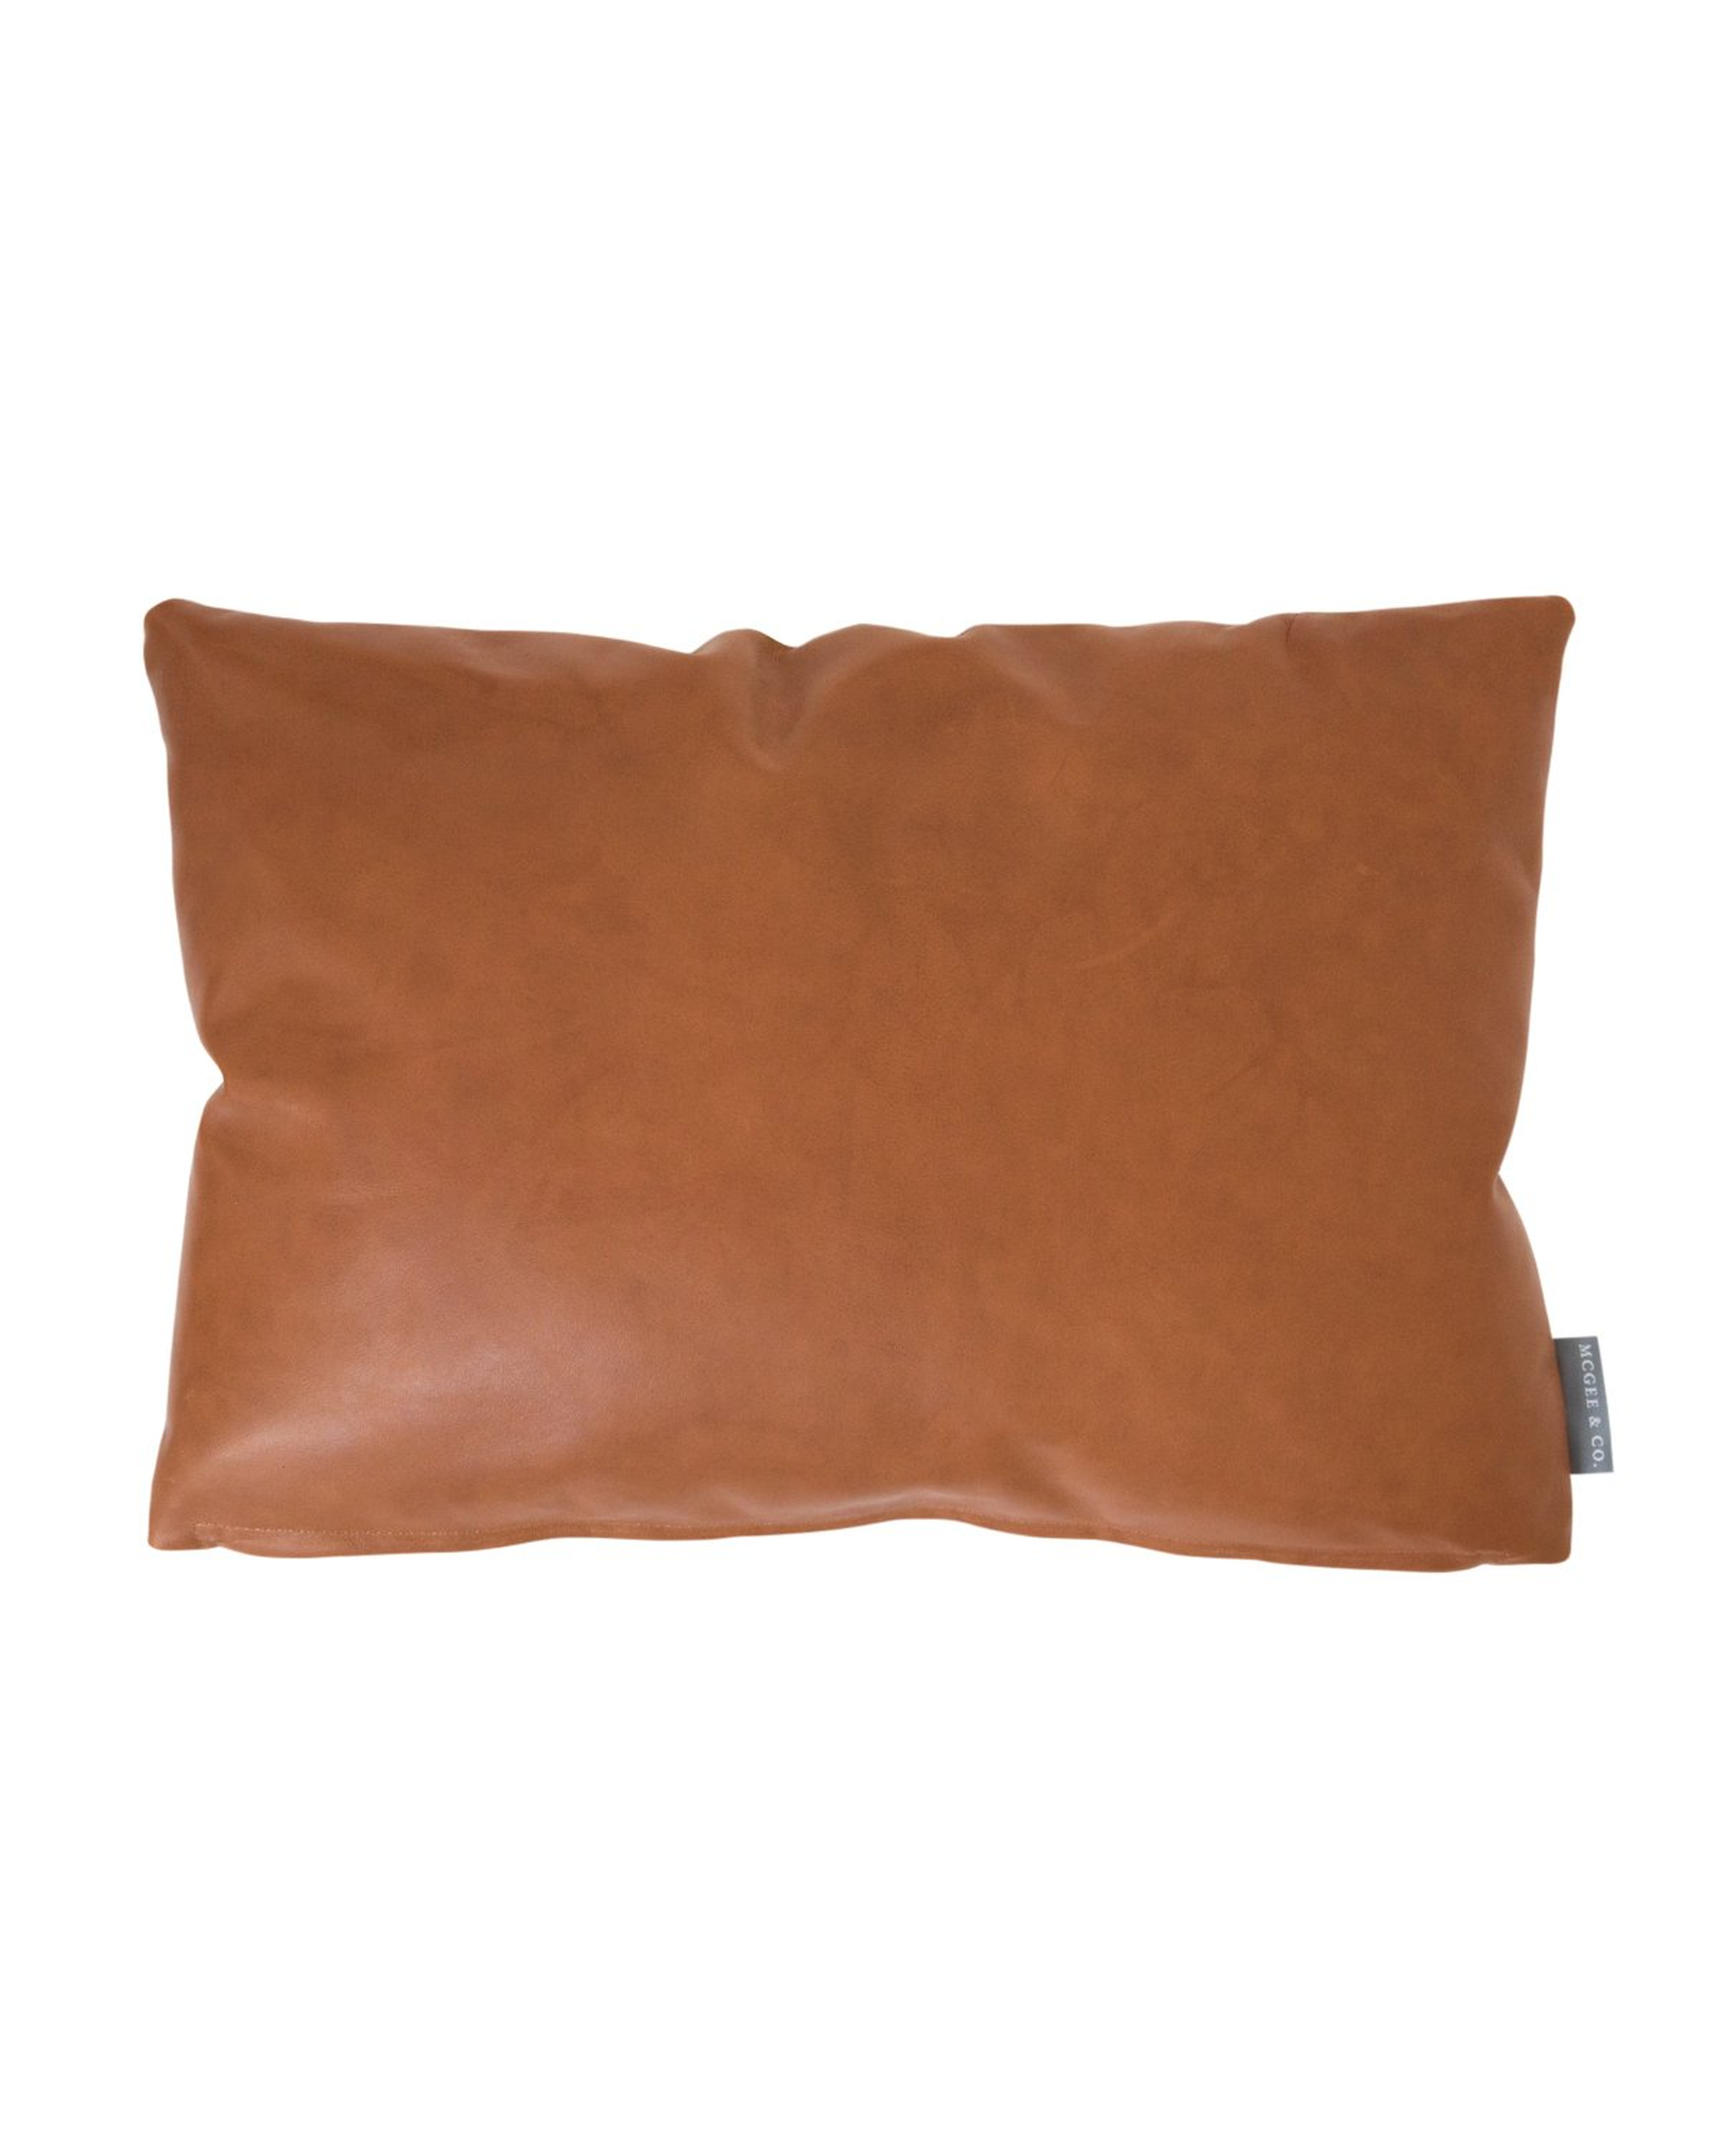 COGNAC LEATHER PILLOW COVER WITH DOWN INSERT, 14" x 20" - McGee & Co.